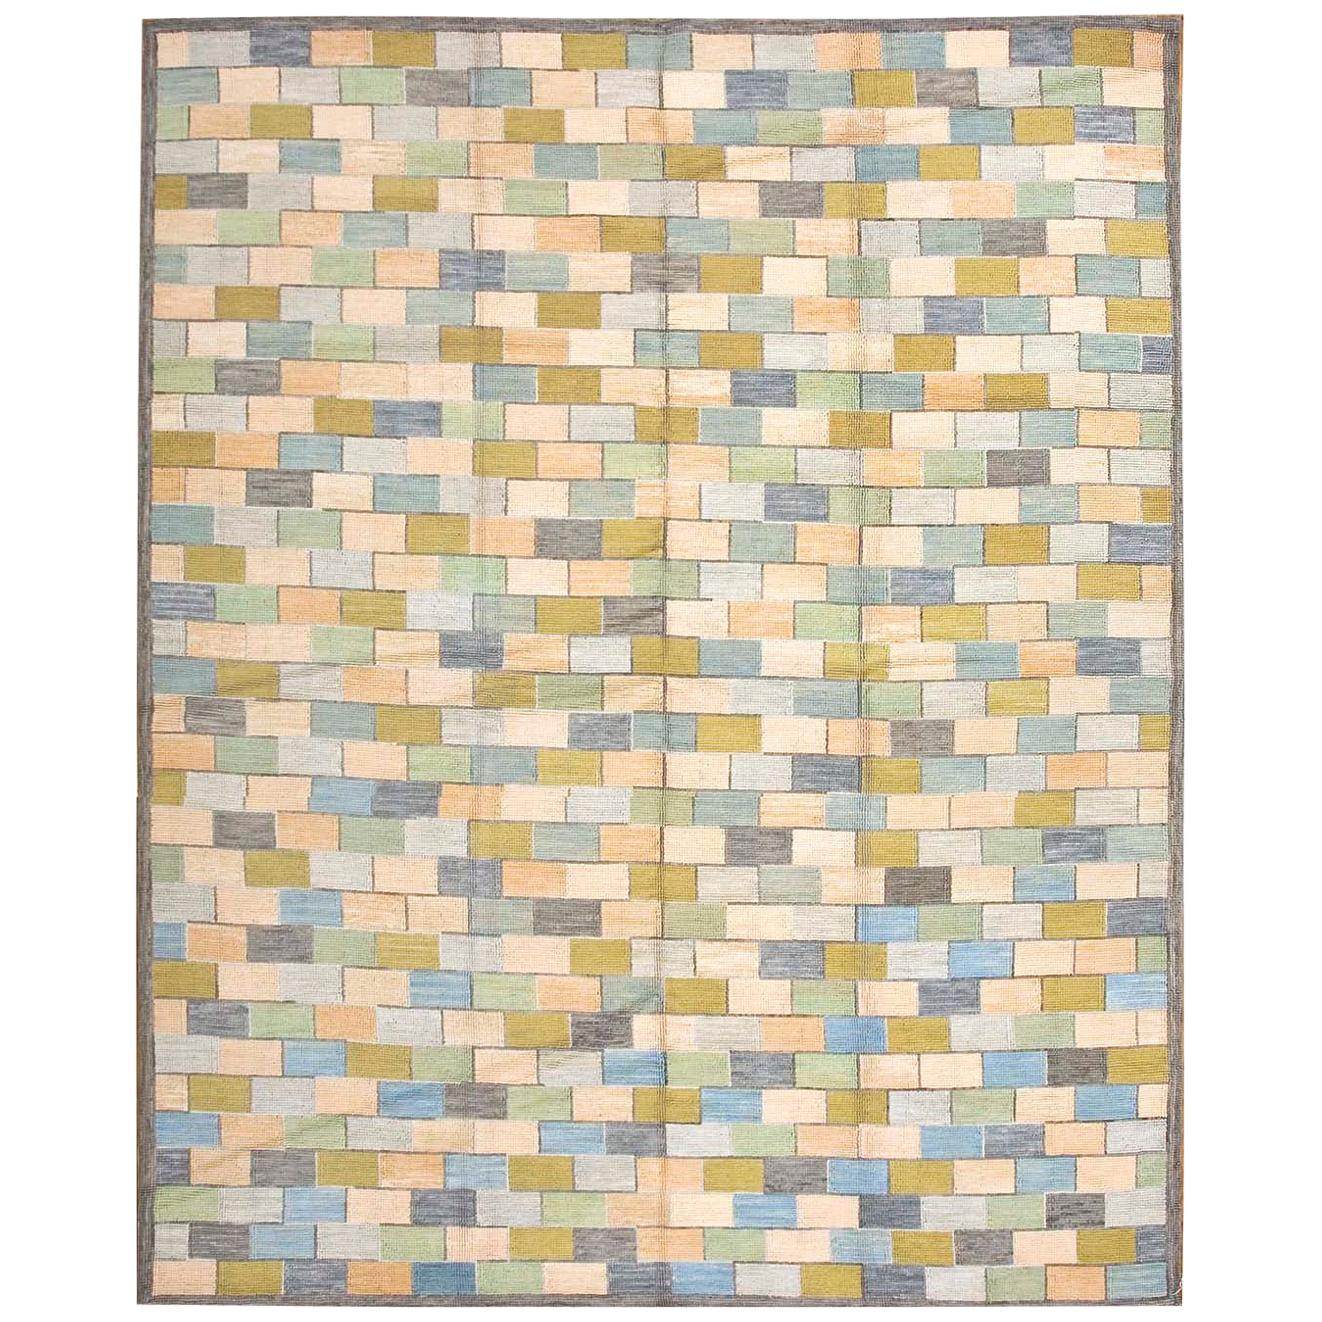 Contemporary American Hooked Rug (9' x 12' - 274 x 365 ) For Sale